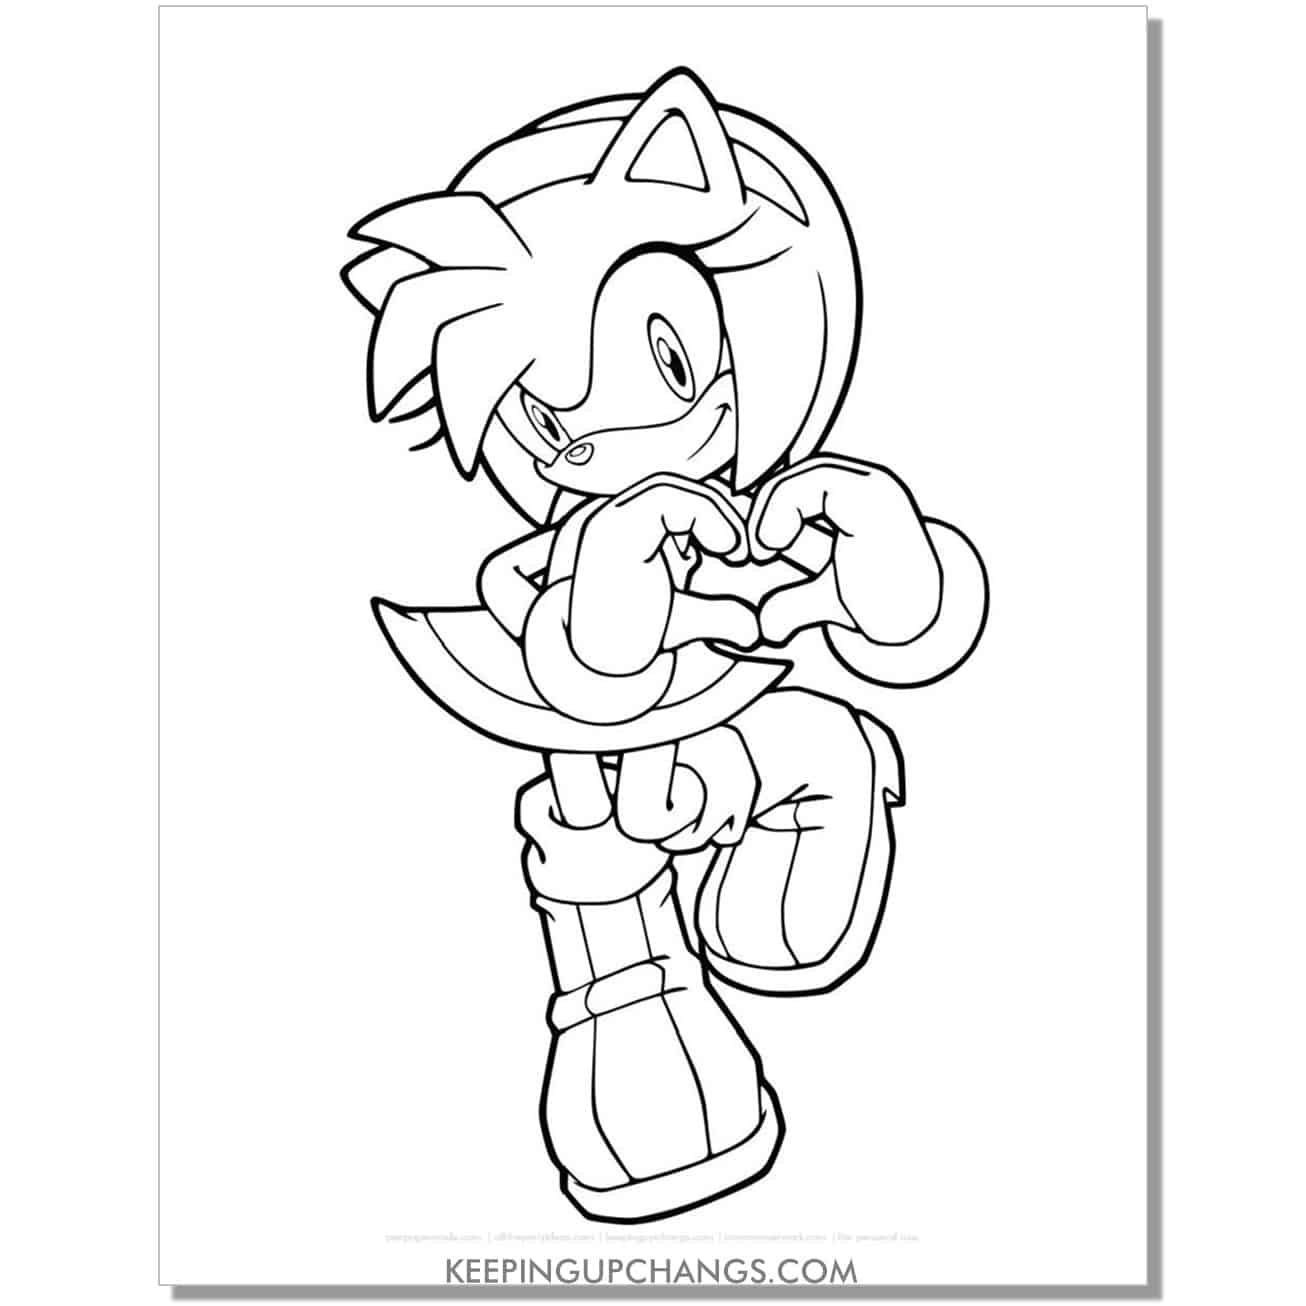 amy rose making heart with hands sonic coloring page.